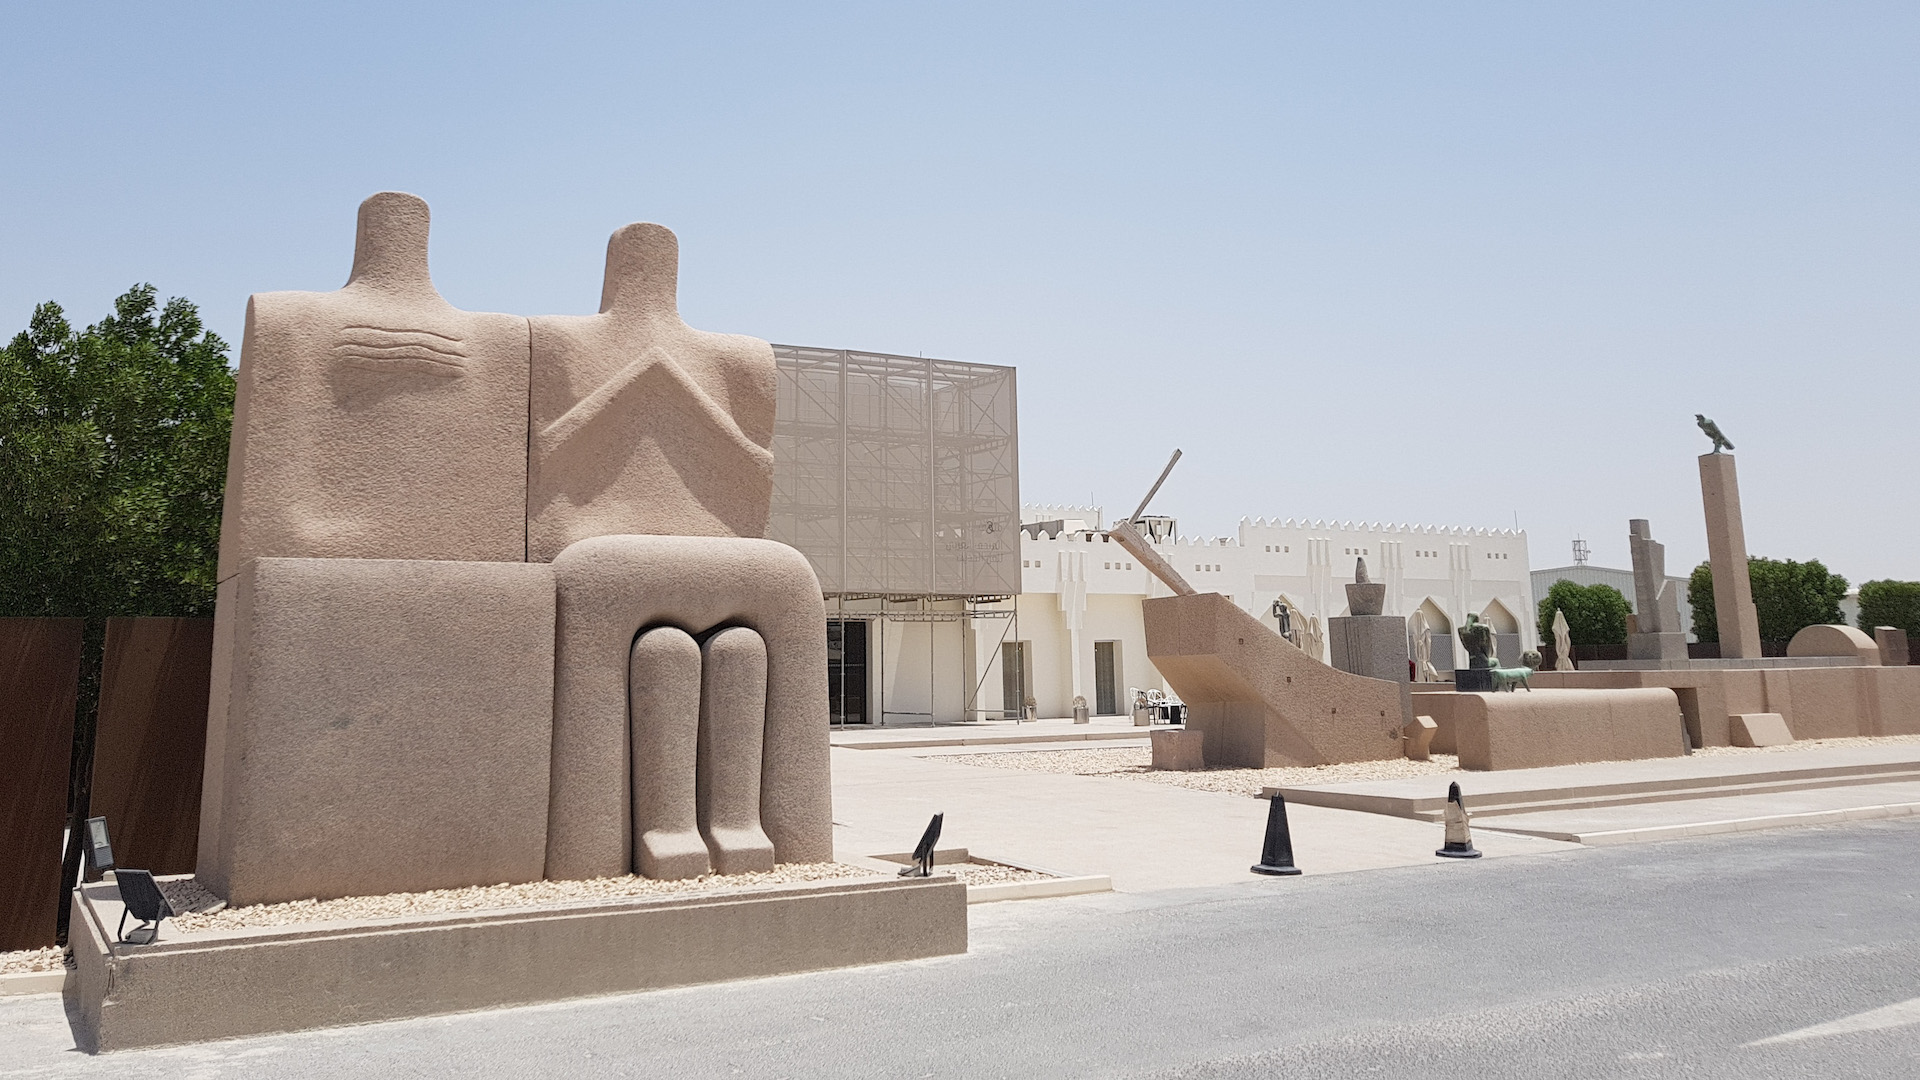 Mathaf: Arab Museum of Modern Art to Showcase Breadth of Contemporary Arab Art in Four New Exhibitions